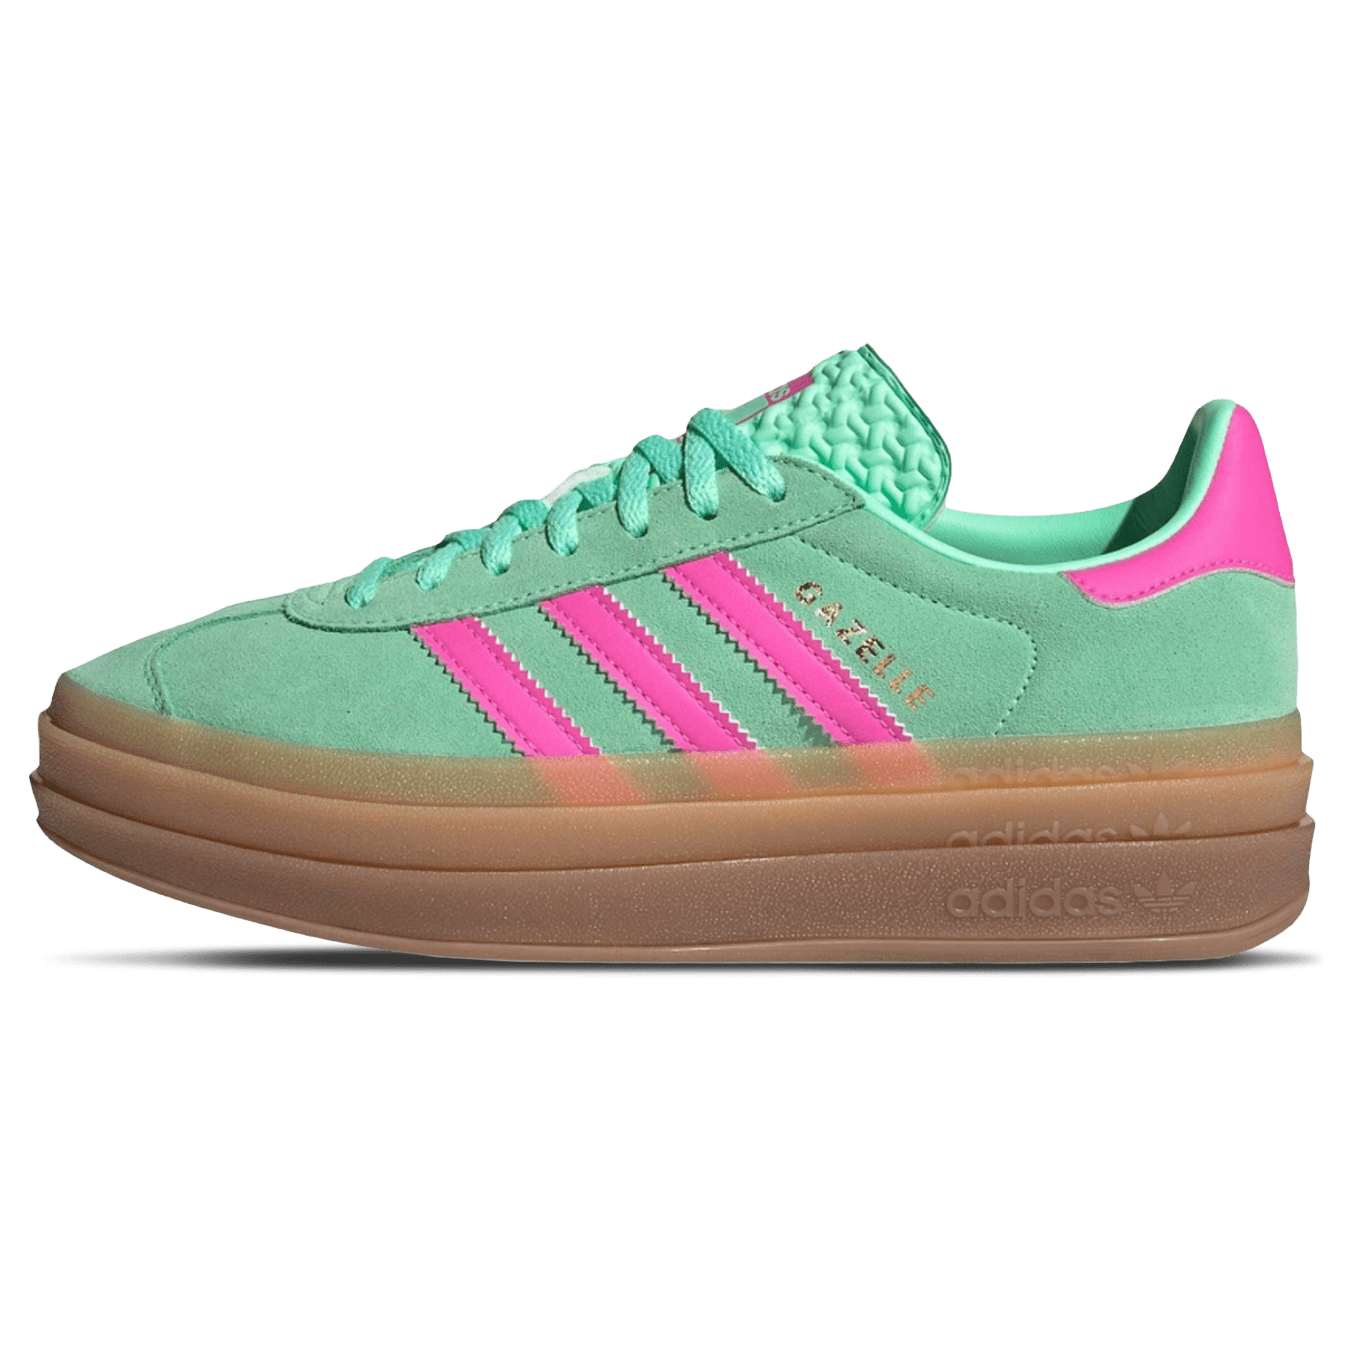 Adidas Bold Wmns 'Pulse Mint Screaming Pink' — Game